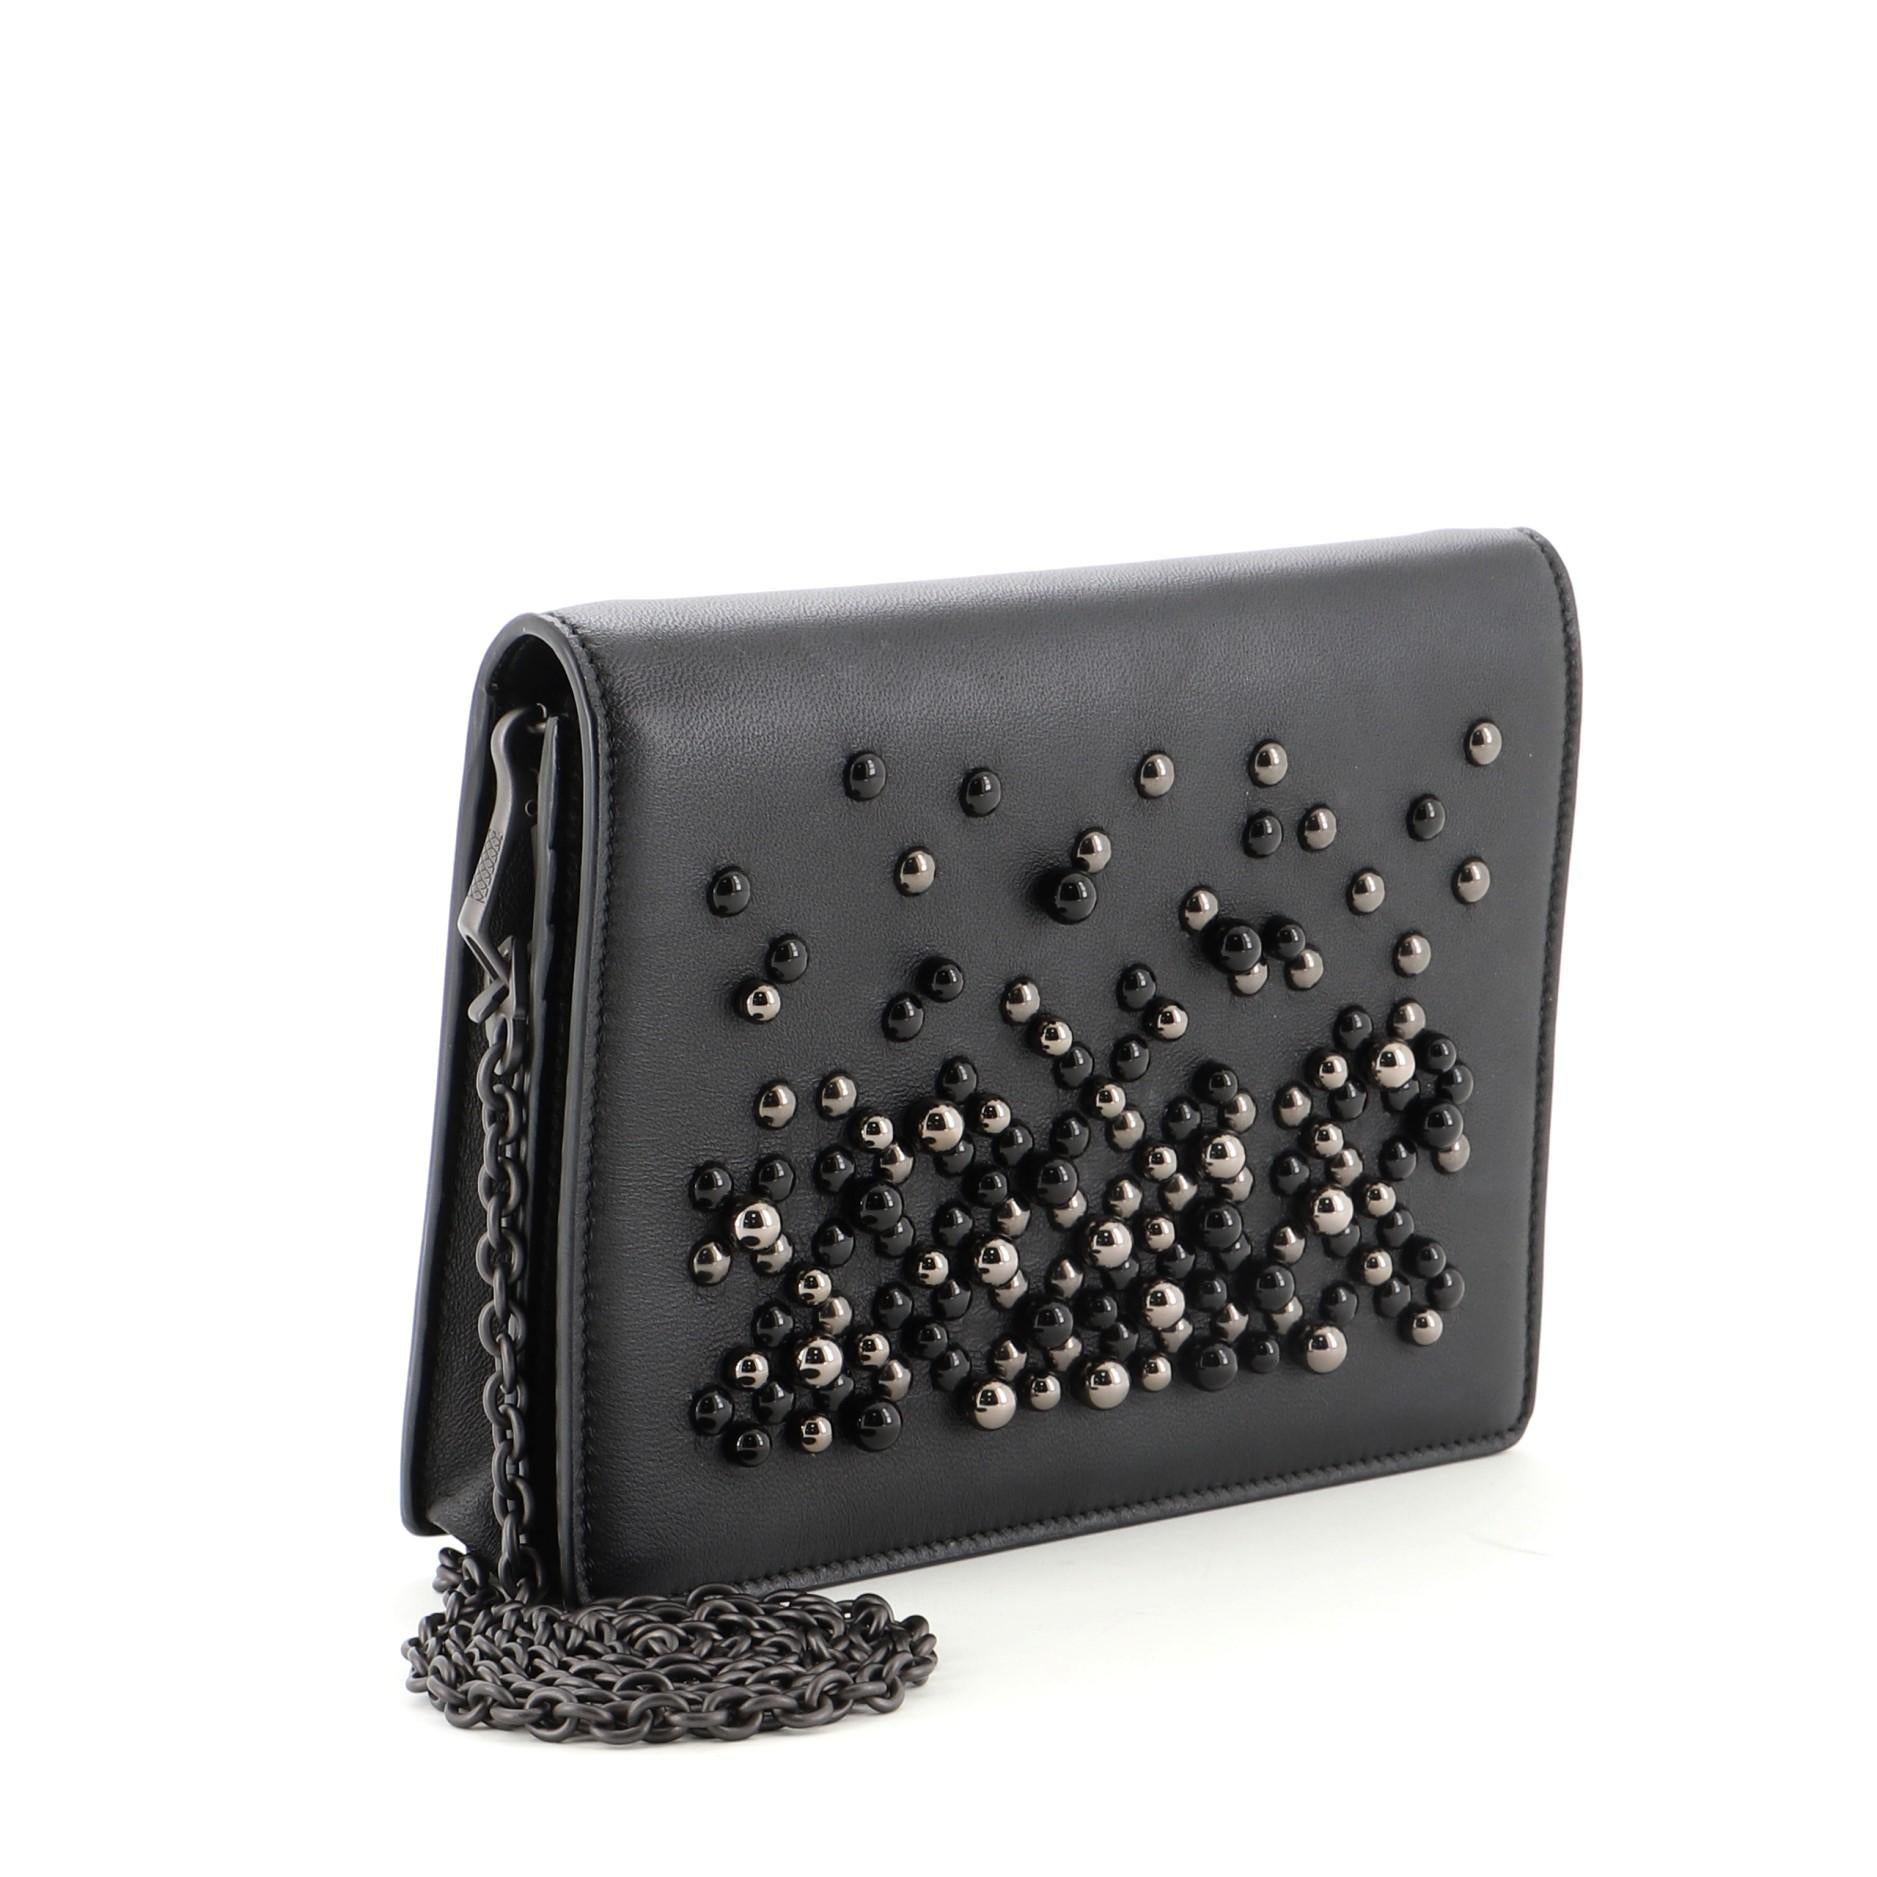 Bottega Veneta Wallet on Chain Pearl Embellished Leather
Black

Condition Details: Light scuffs and wear on exterior and underneath flap, scratches on hardware.

50005MSC

Height 